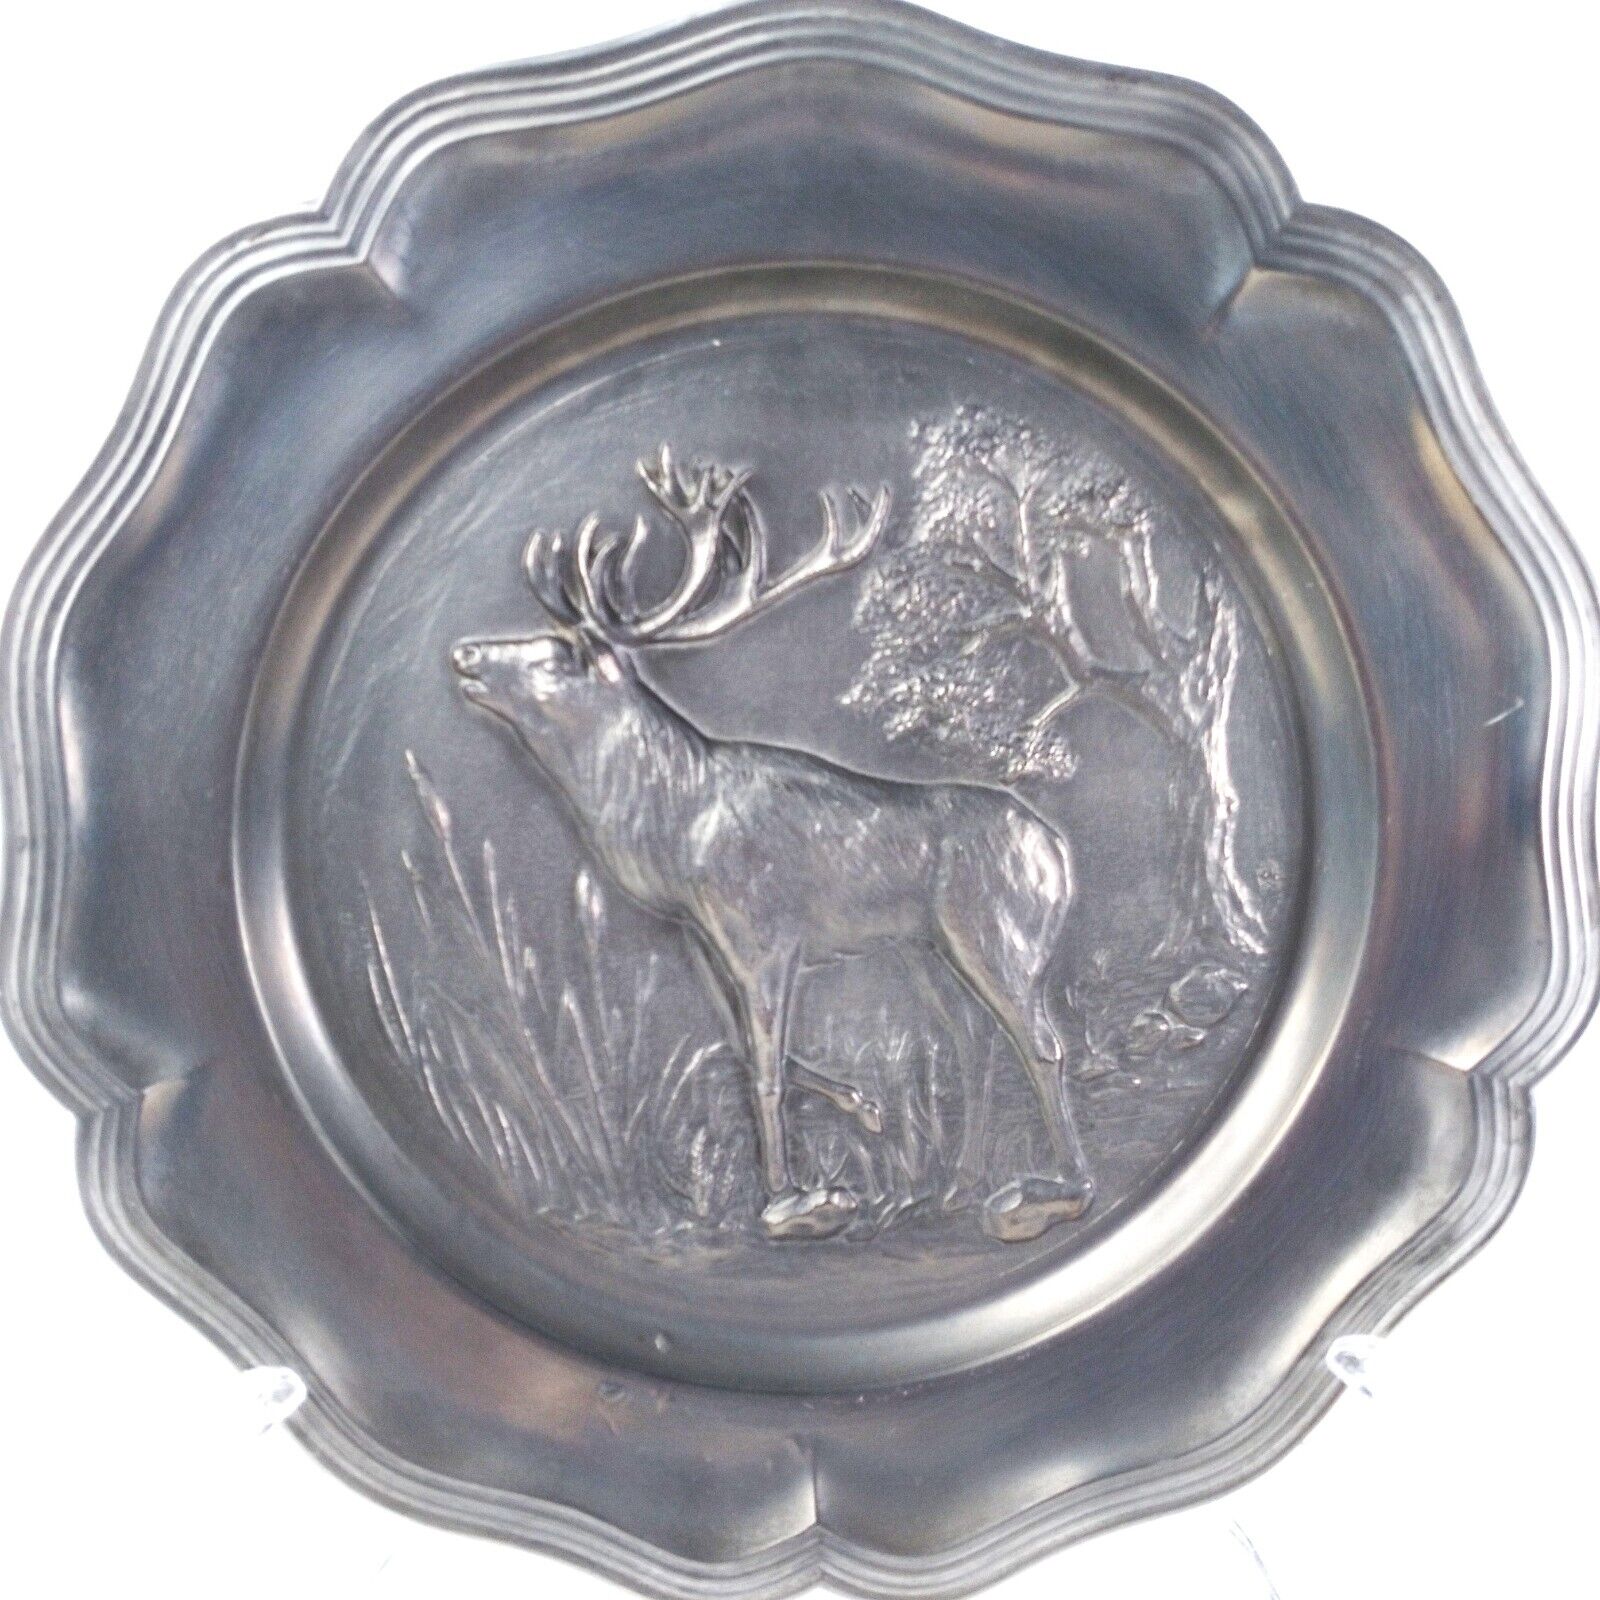 Vintage German Zinn Pewter Wall Plate Hunting Stag 10 Point - J998250 Scalloped